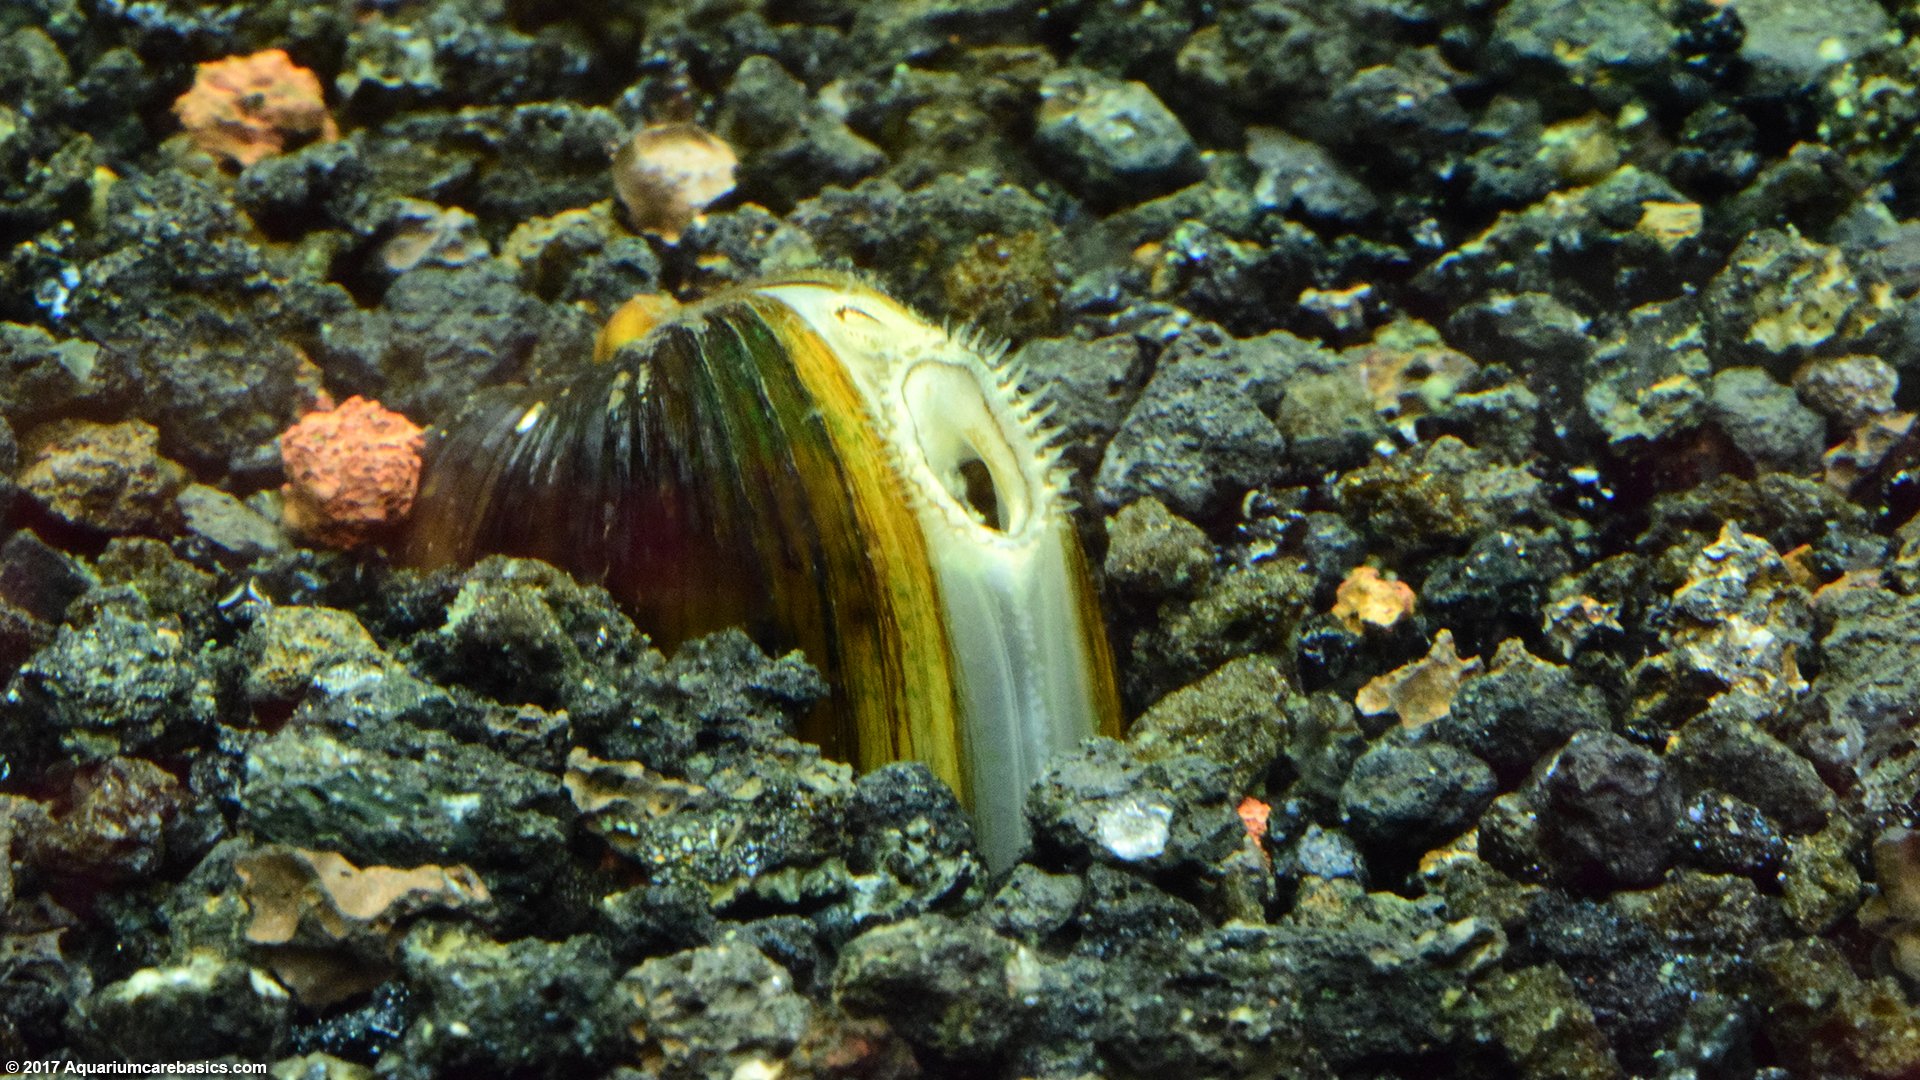 Freshwater aquarium clams that you can keep in your tank!